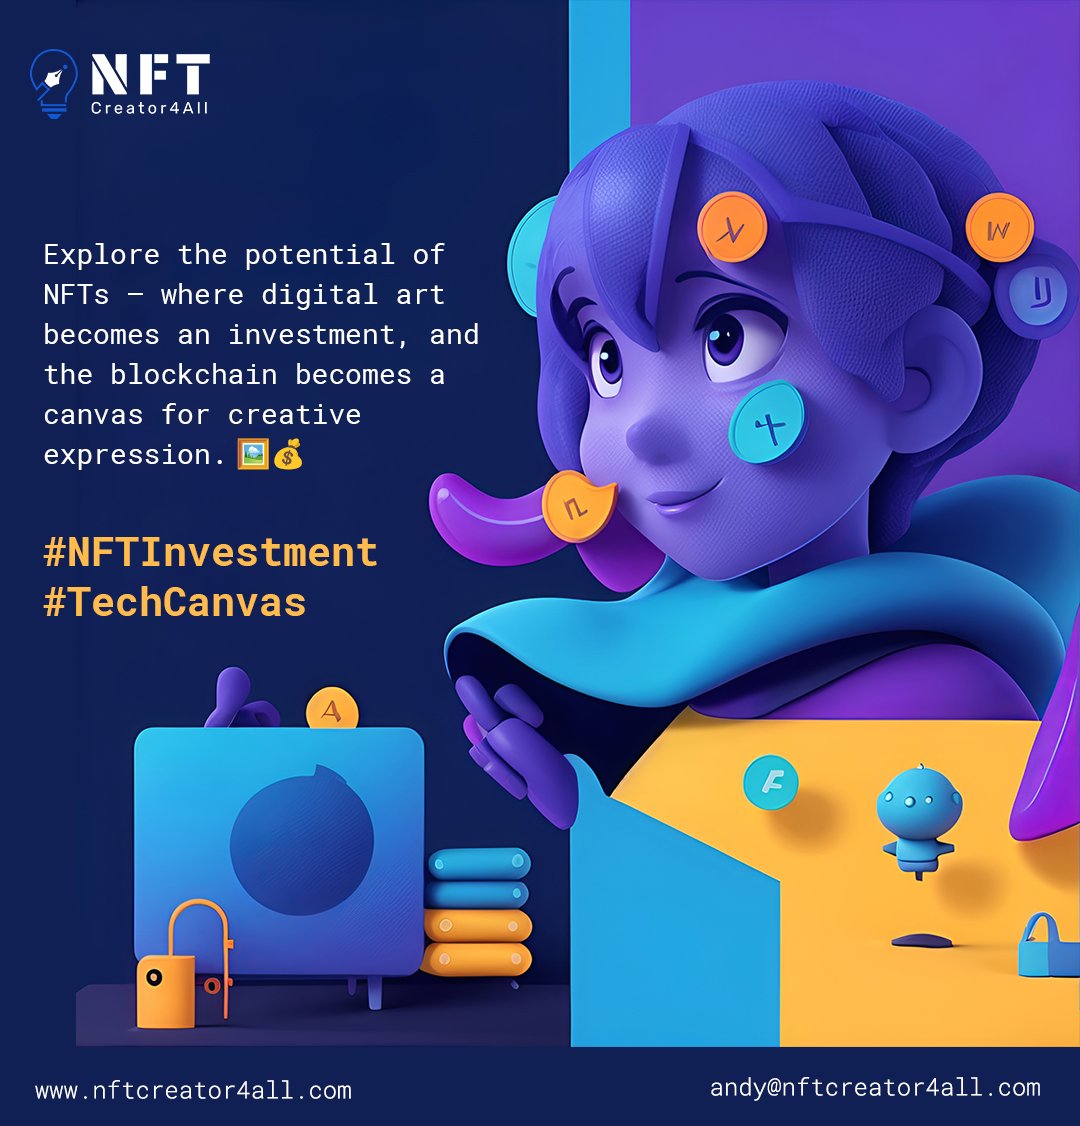 Discover the game-changing world of NFTs, where digital art becomes a lucrative investment opportunity!

💼 Blockchain technology guarantees authenticity and scarcity, as each artwork is tokenized with smart contracts on decentralized ledgers.

#NFTs #BlockchainArt